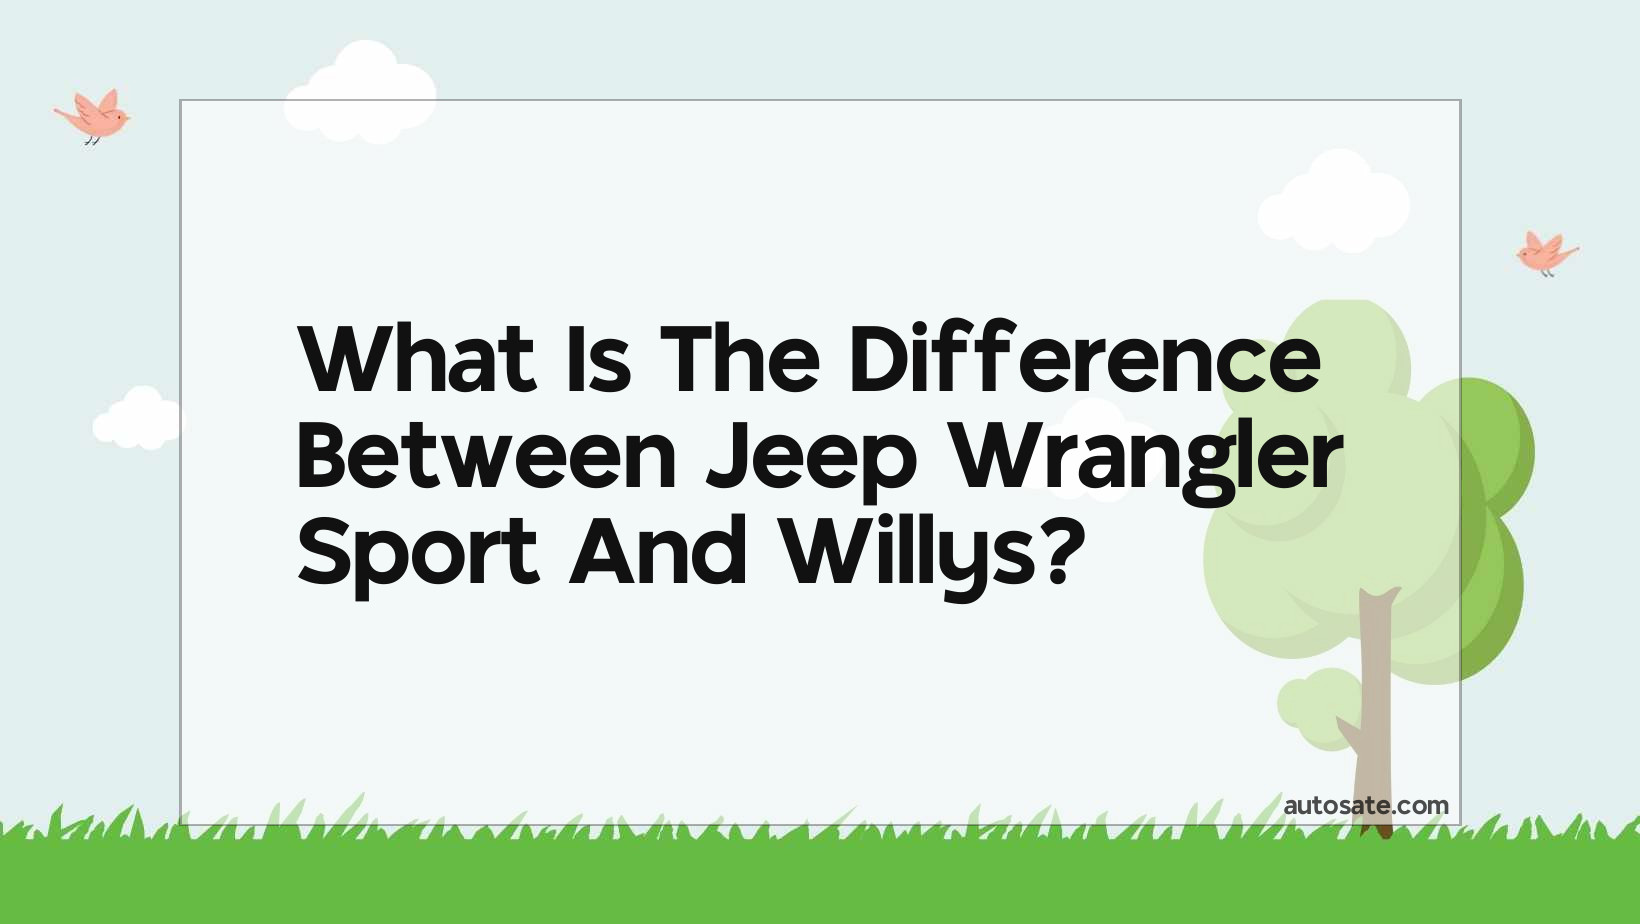 What Is The Difference Between Jeep Wrangler Sport And Willys